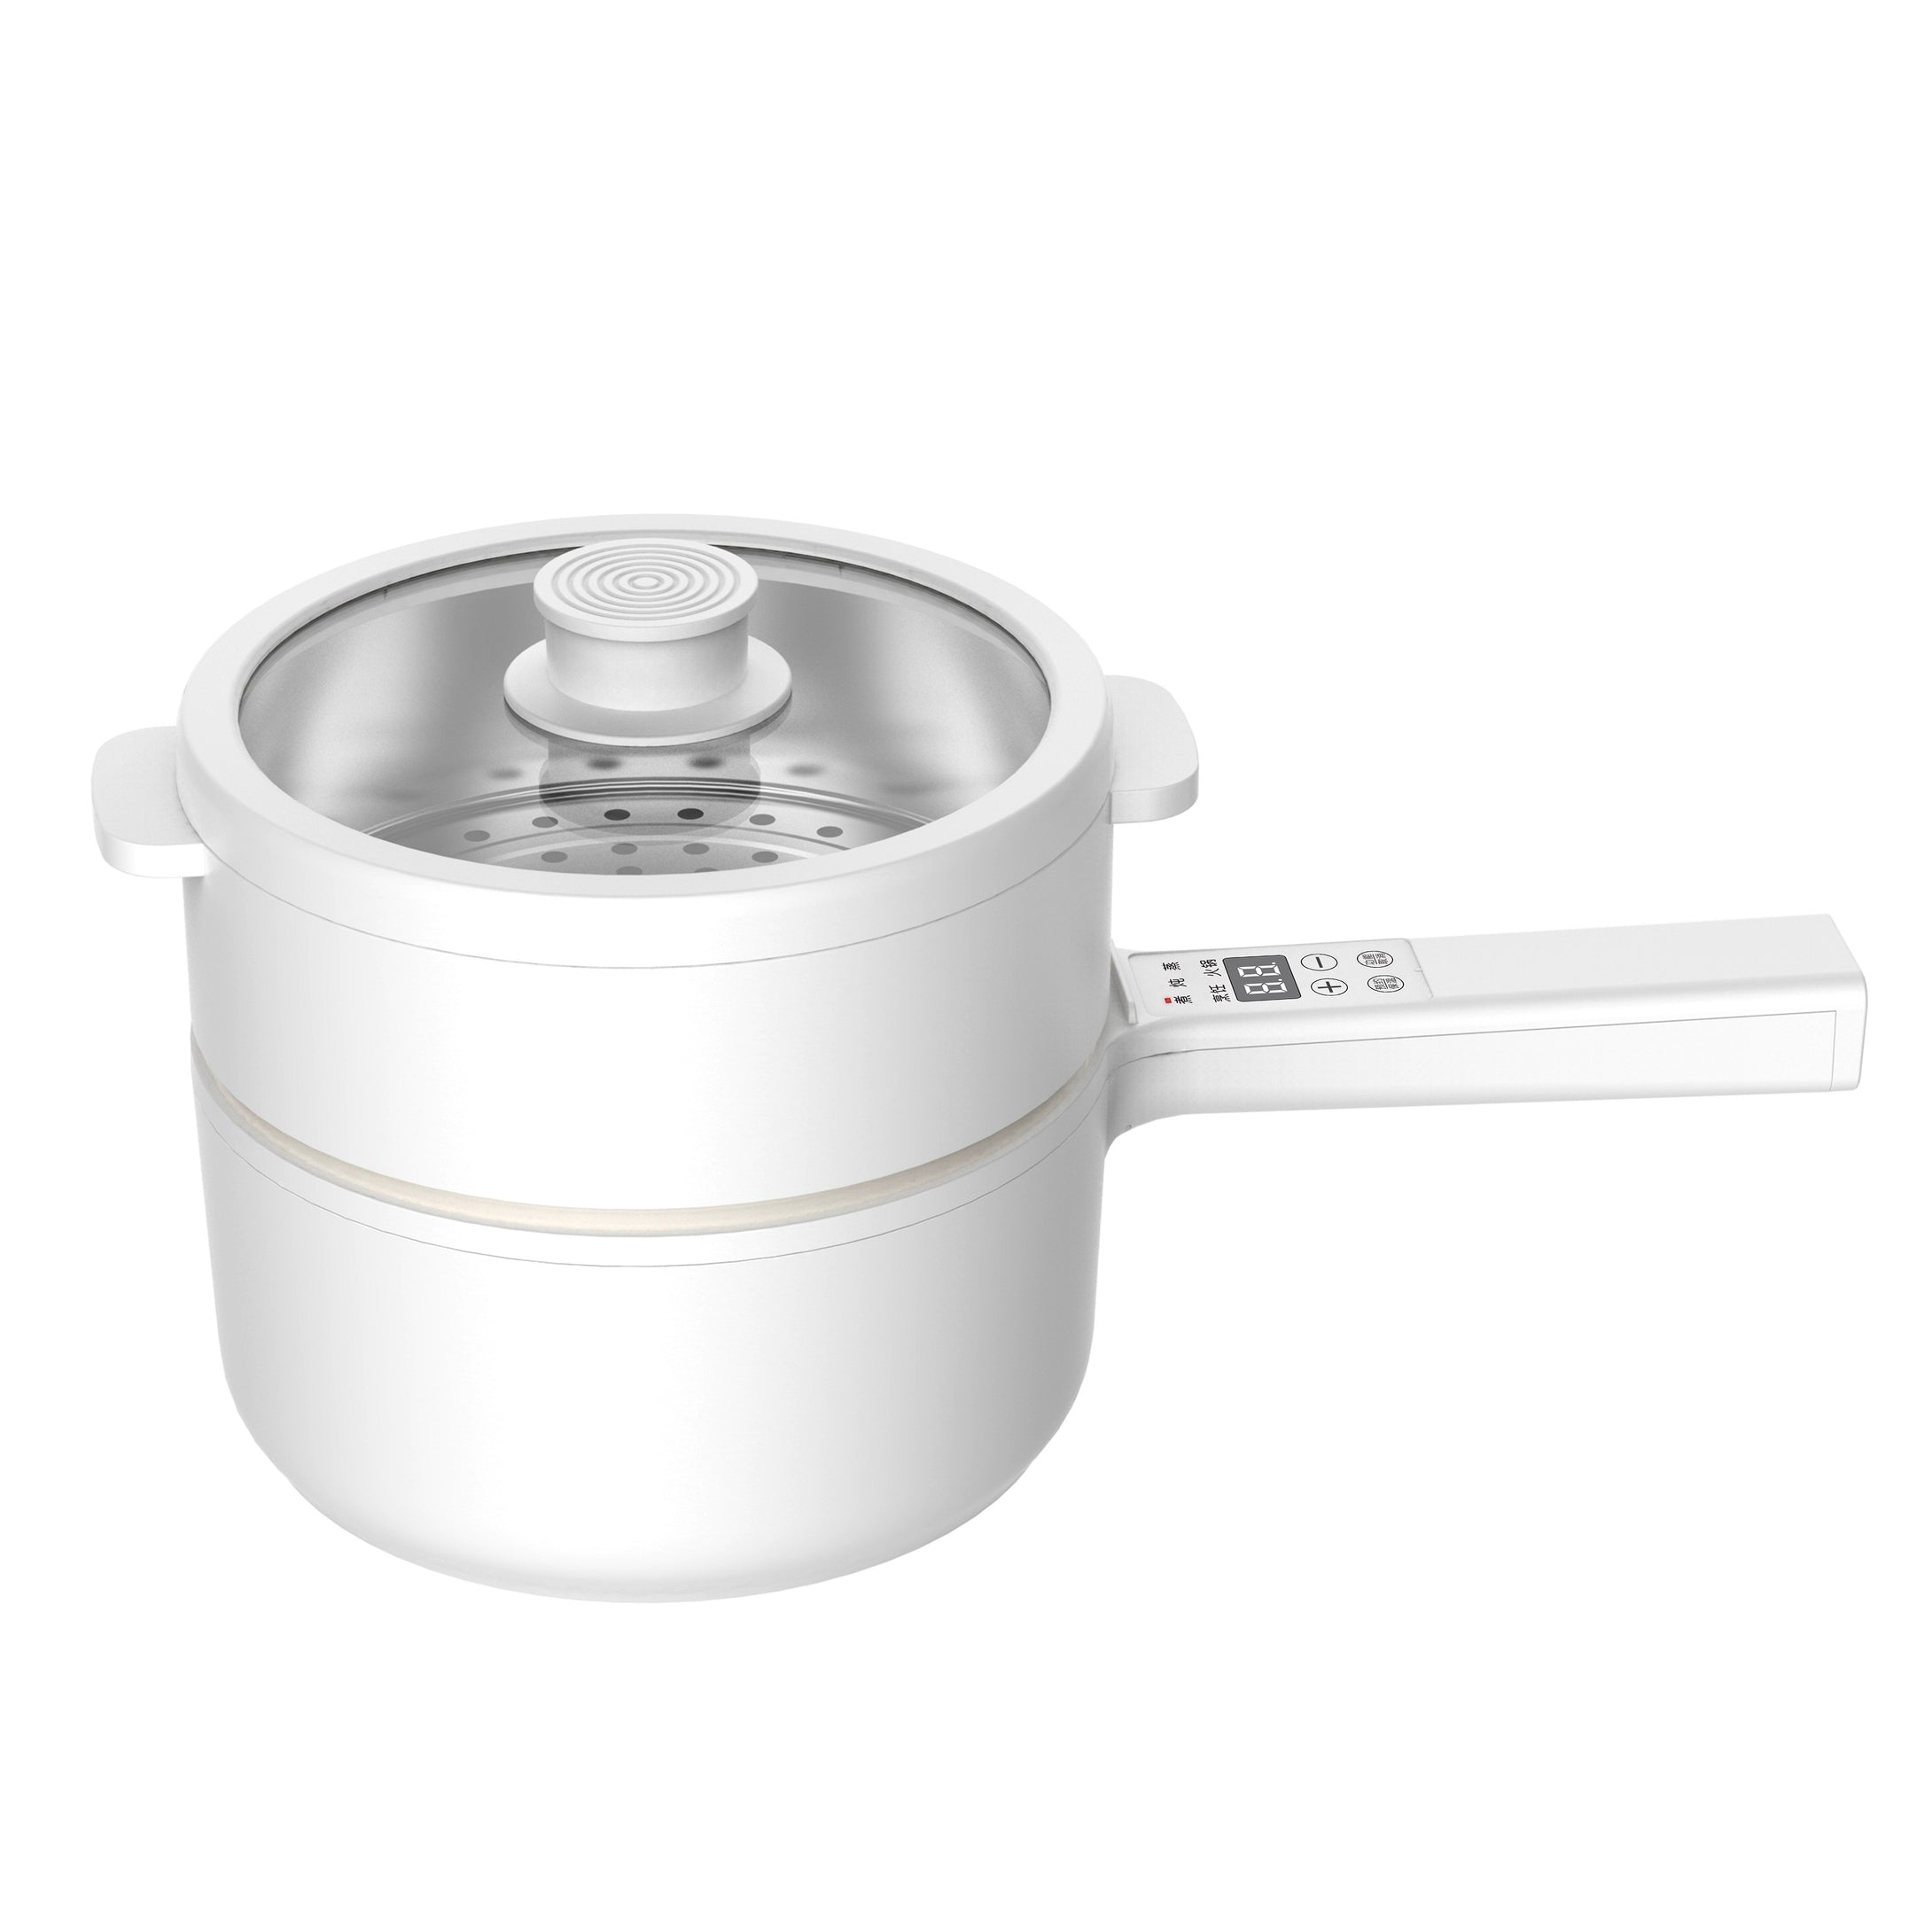 Smart Mini Electric Cooker 1.5L (with handle)